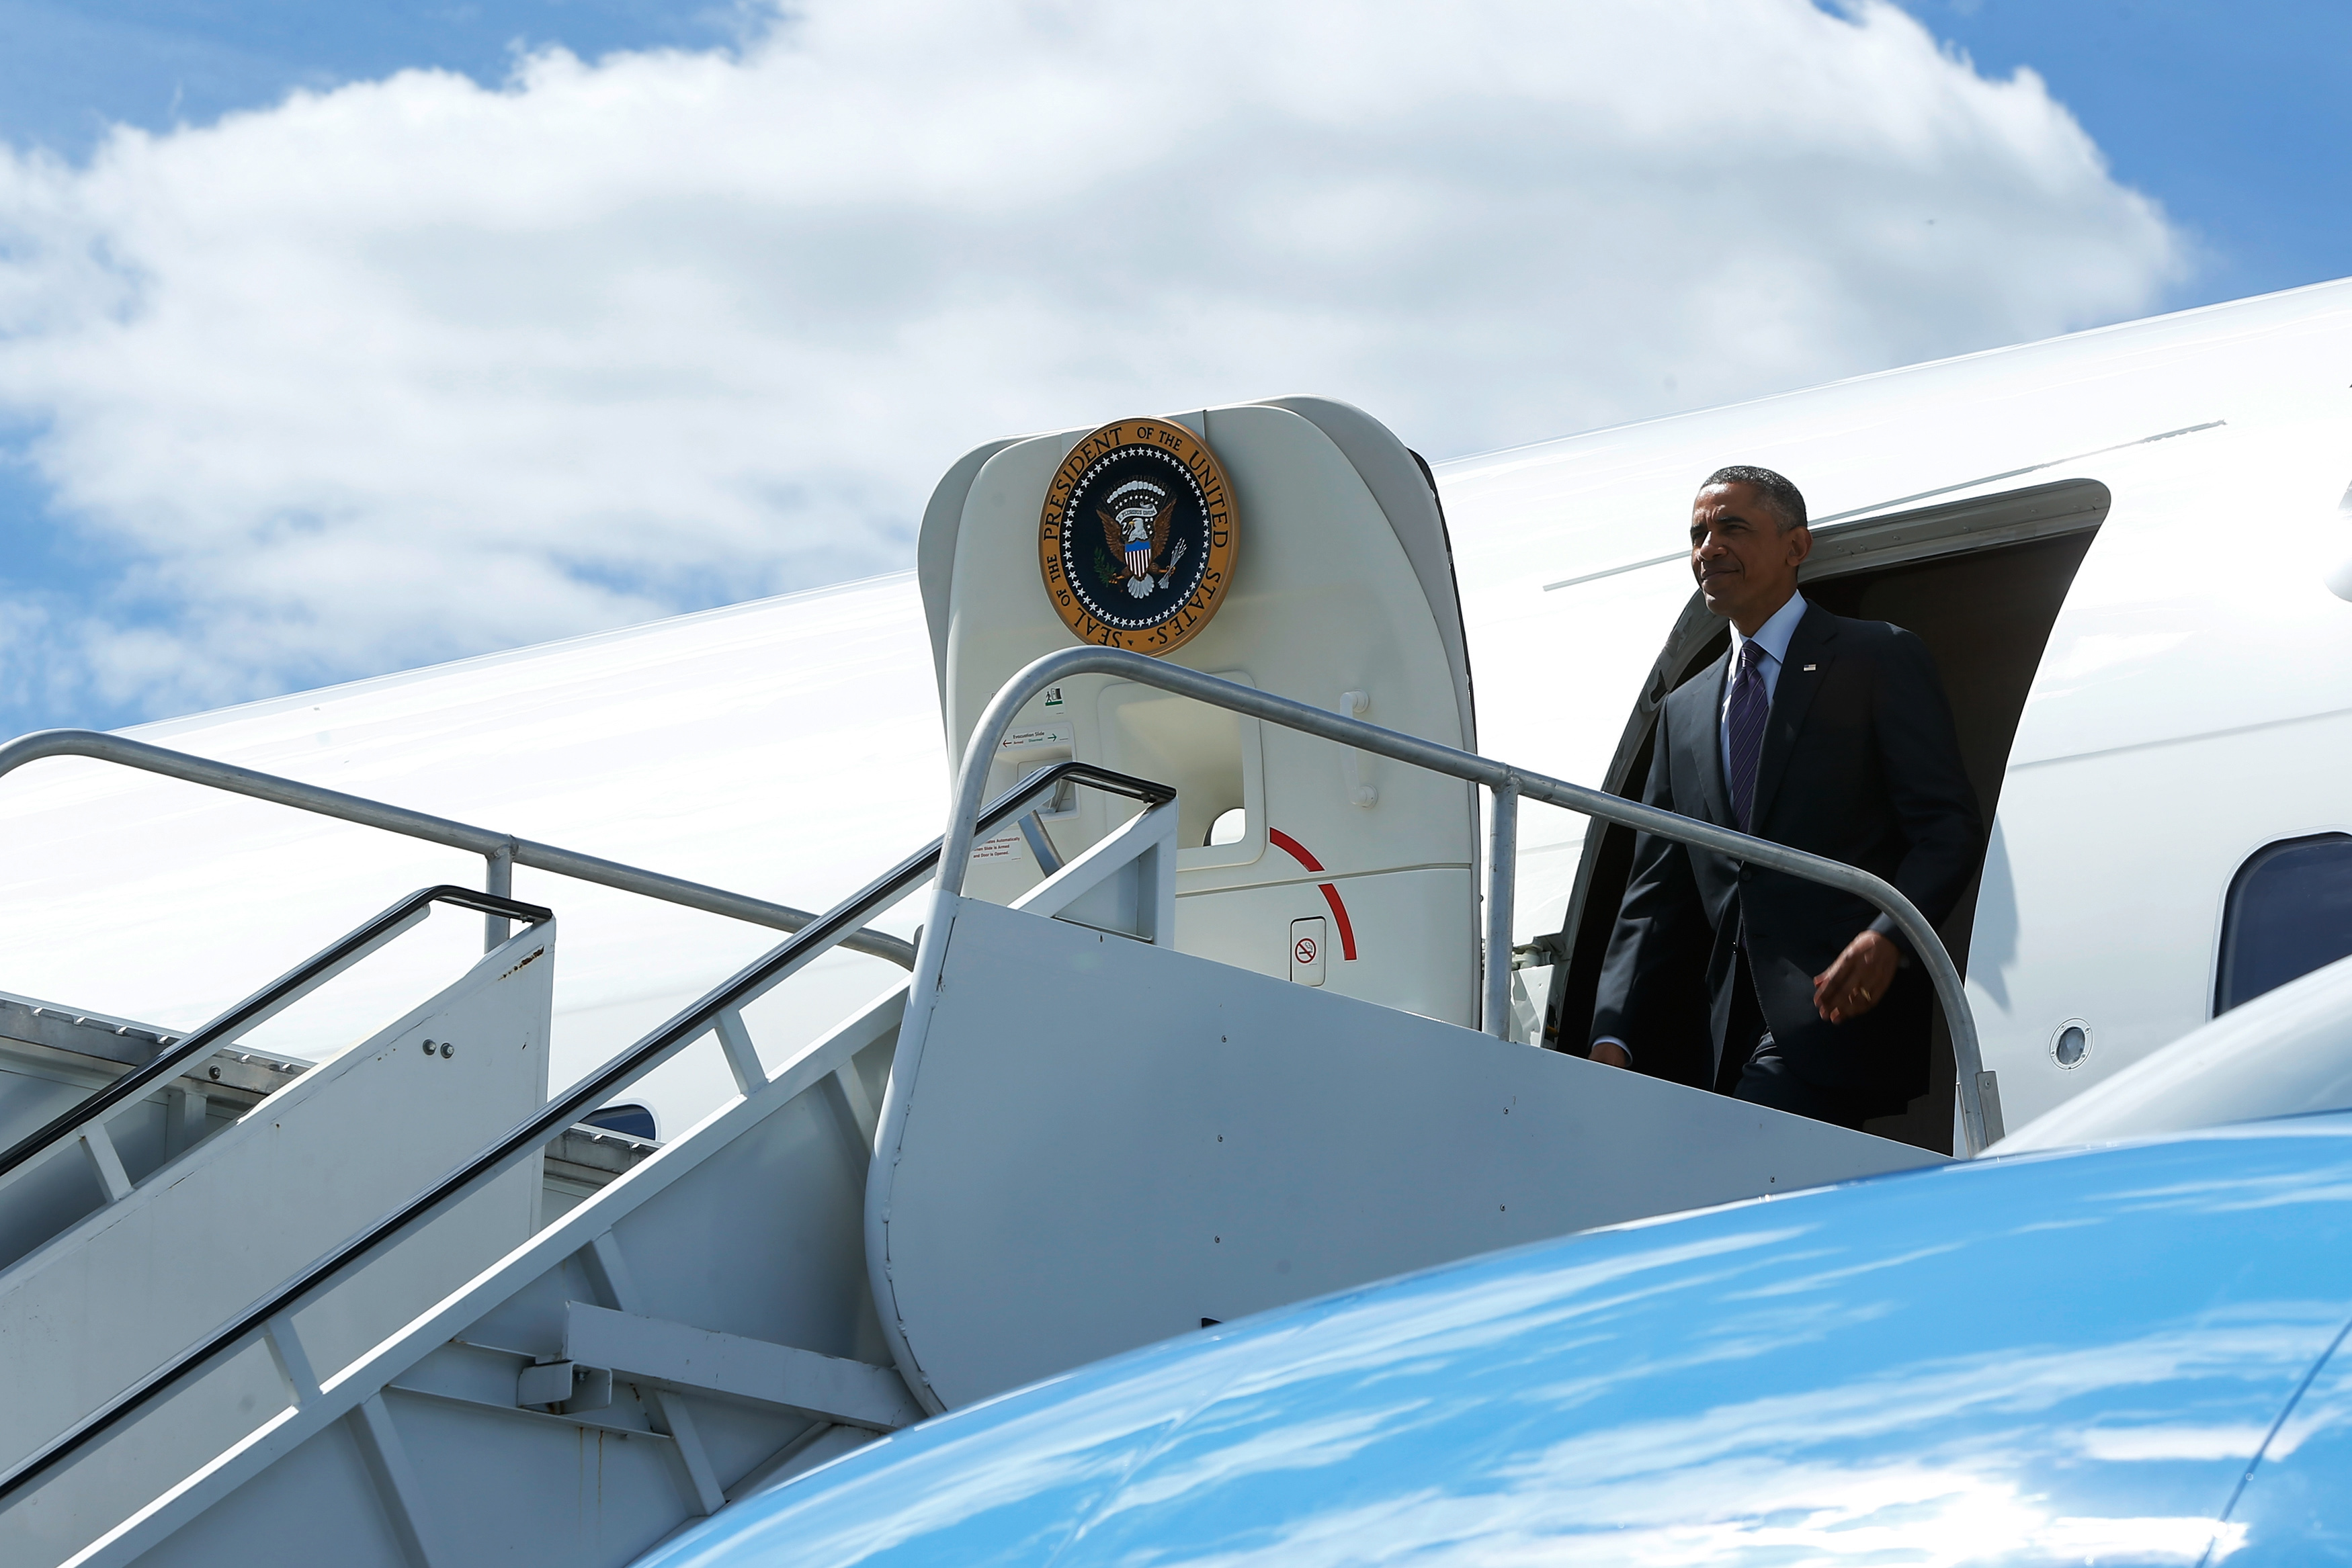 U.S. President Barack Obama arrives on board Air Force One at Westchester County Airport in White Plains, N.Y., on Aug. 29, 2014 (Jonathan Ernst—Reuters)